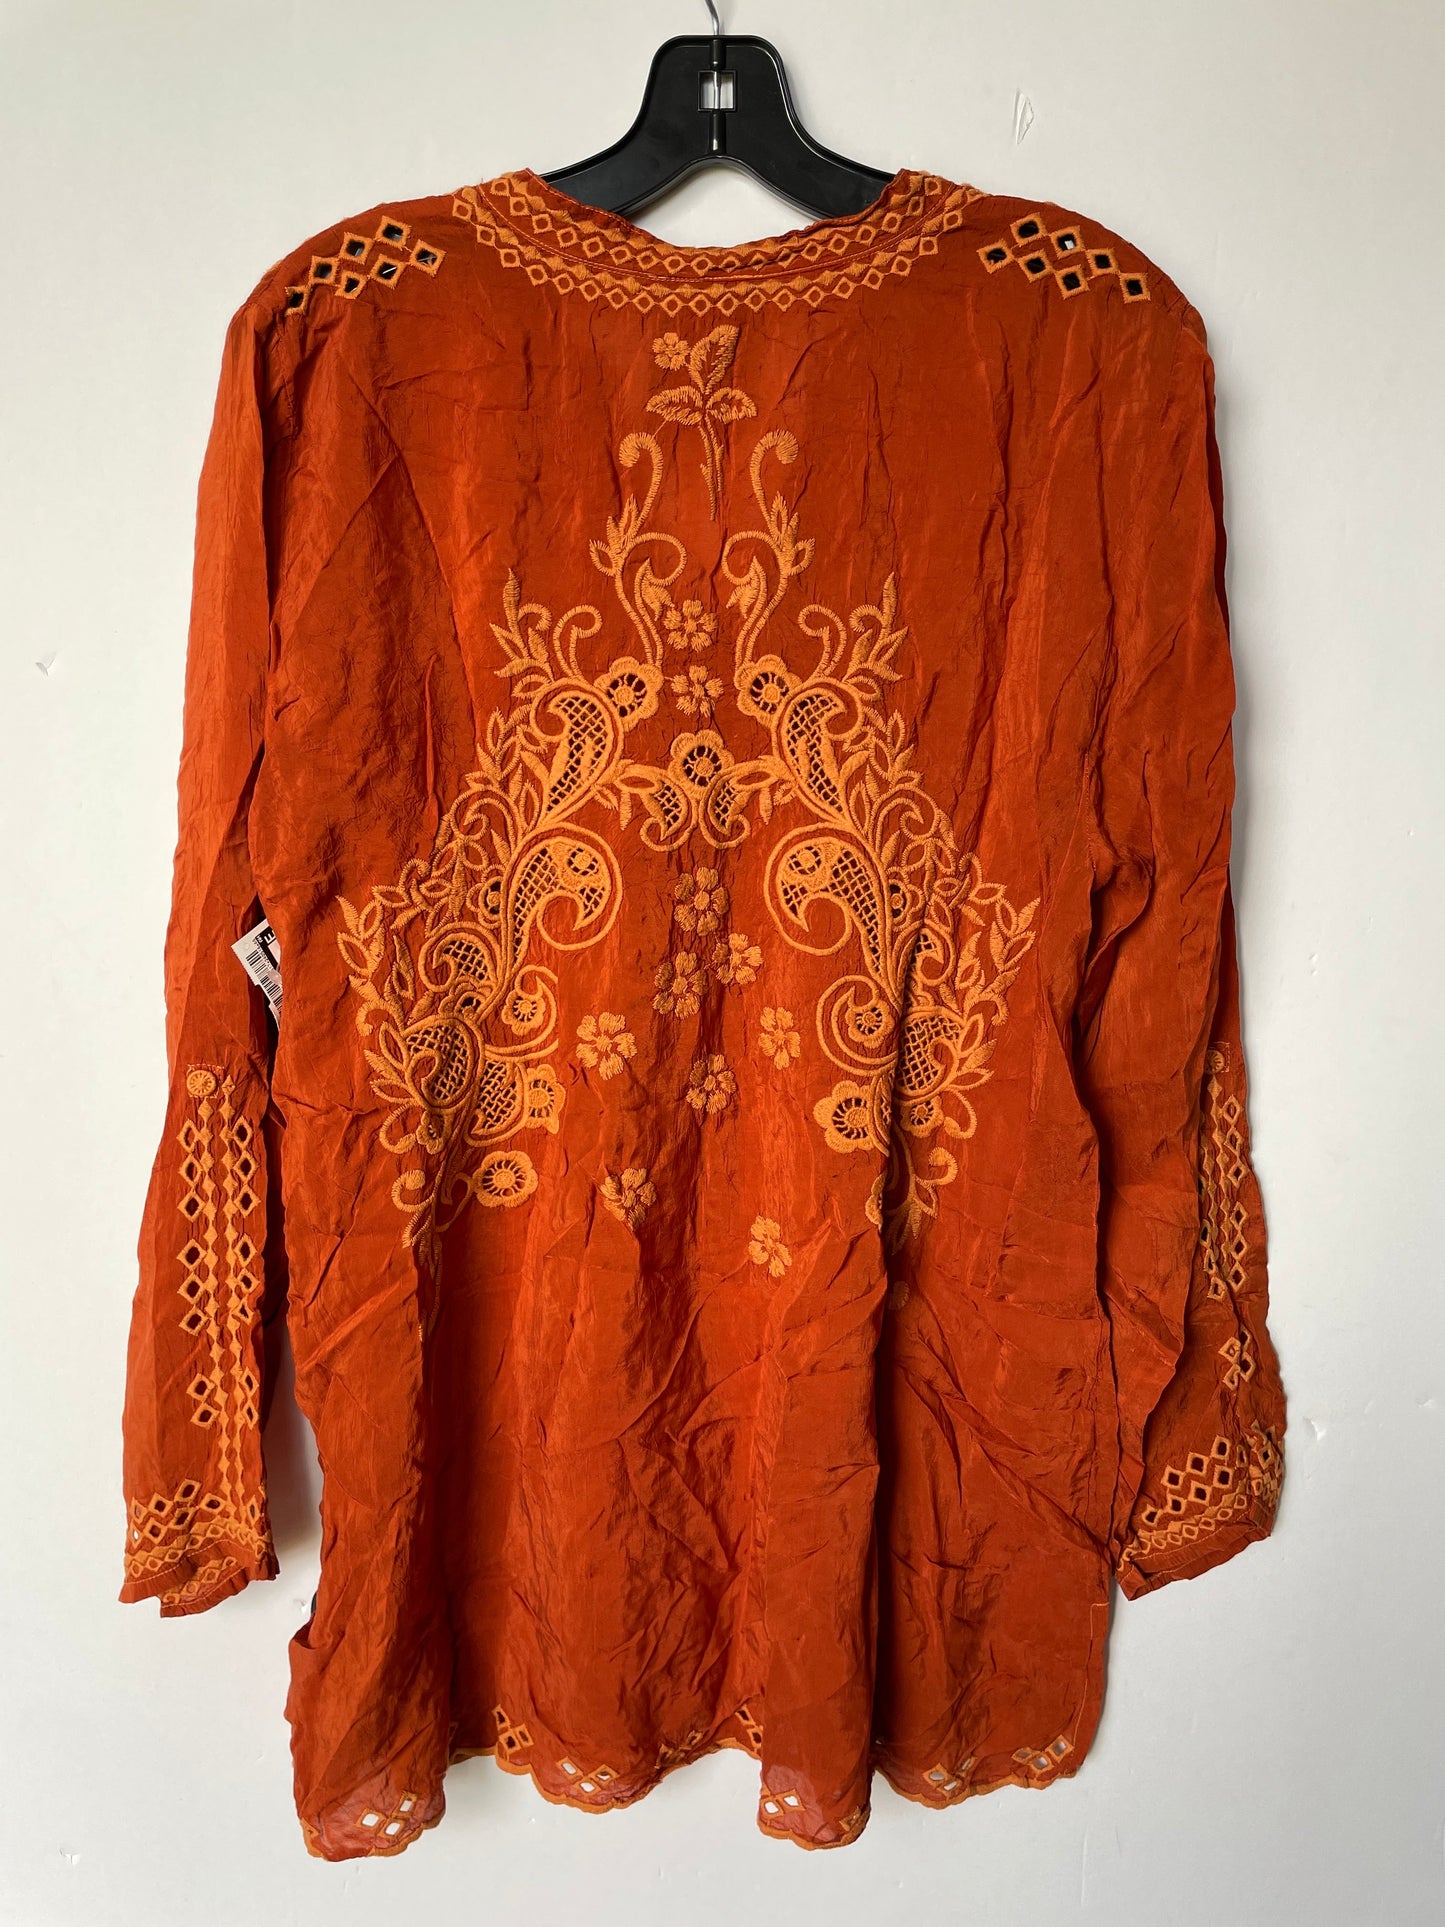 Orange Top Long Sleeve Johnny Was, Size Xl